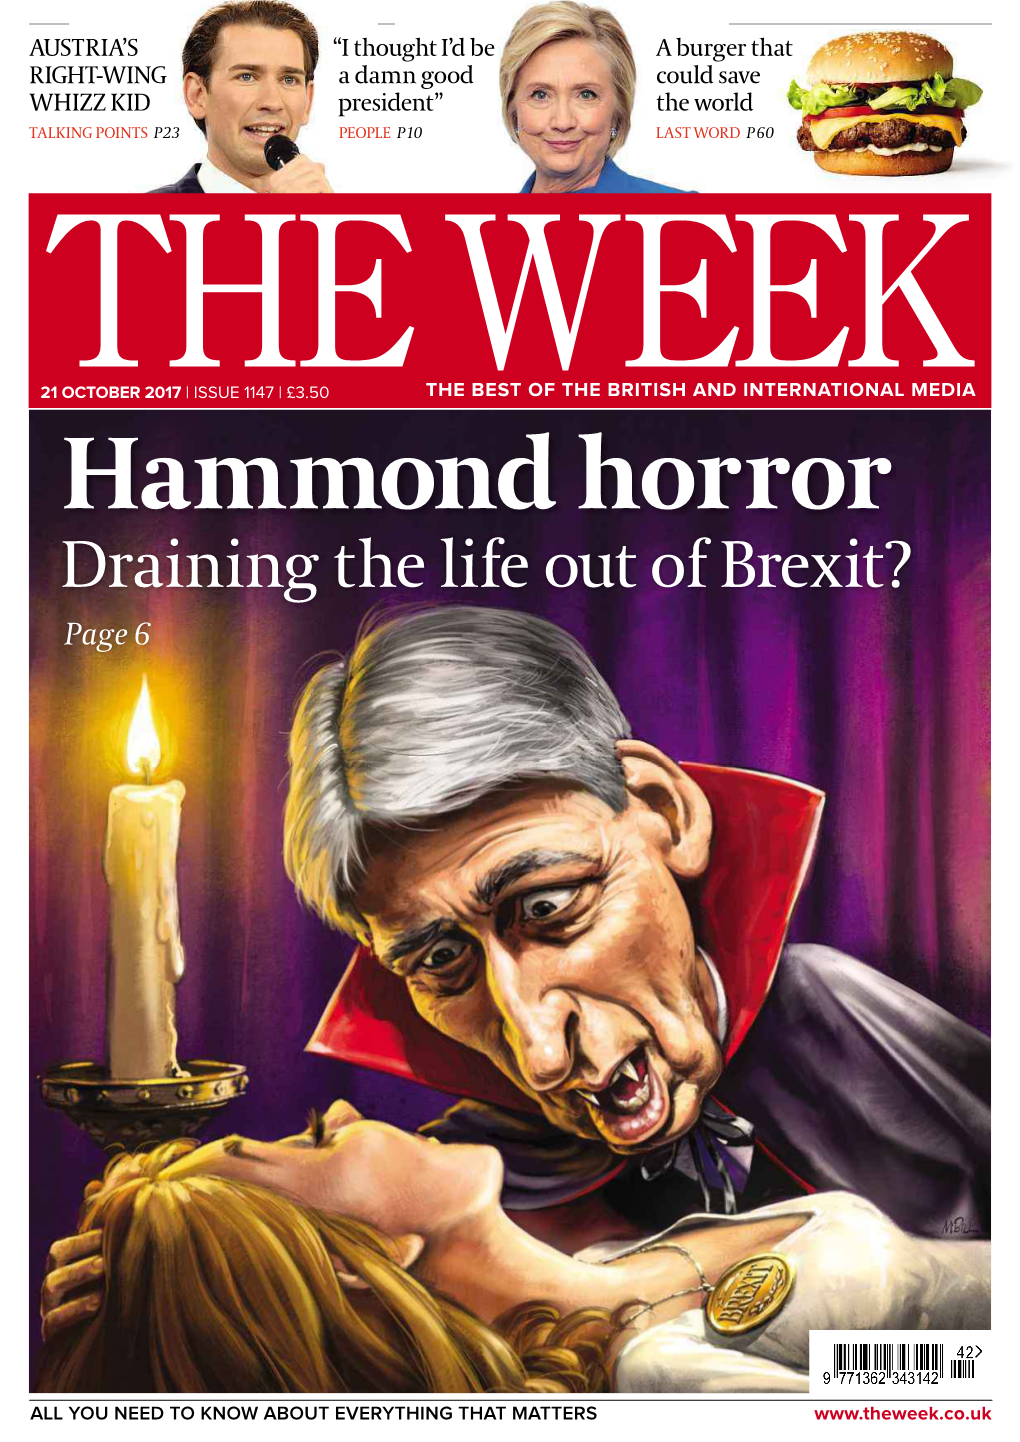 Hammondhorror Draining Thelifeout of Brexit? Page6